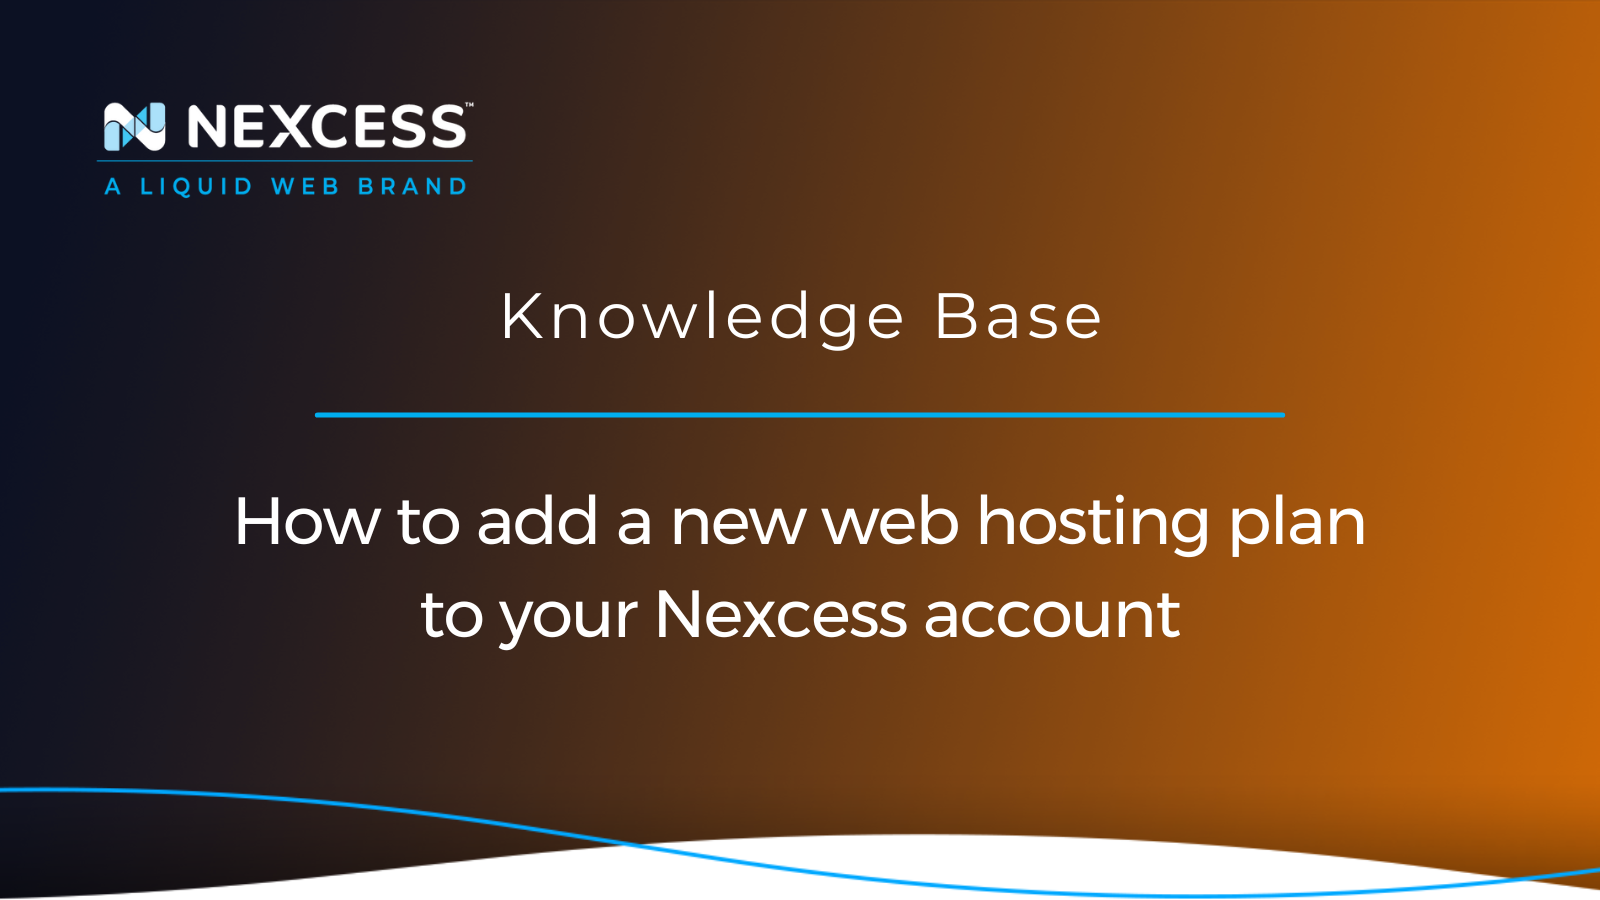 How to add a new web hosting plan to your Nexcess account